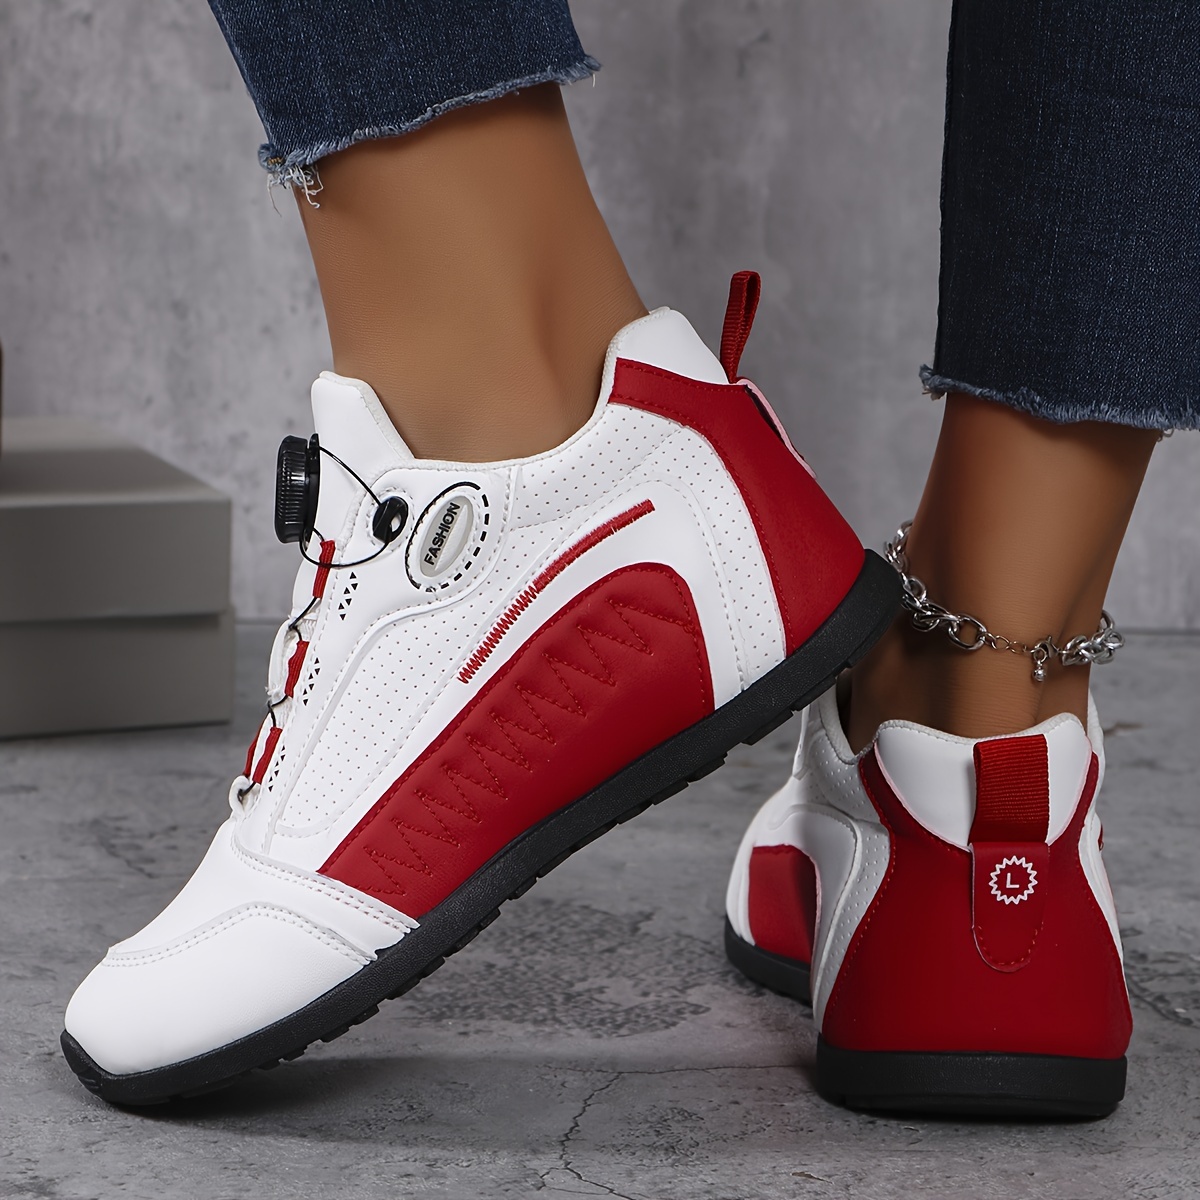 

Women's Rotating Button Sneakers, Casual Low Top Outdoor Shoes, Comfort Walking Sporty Trainers